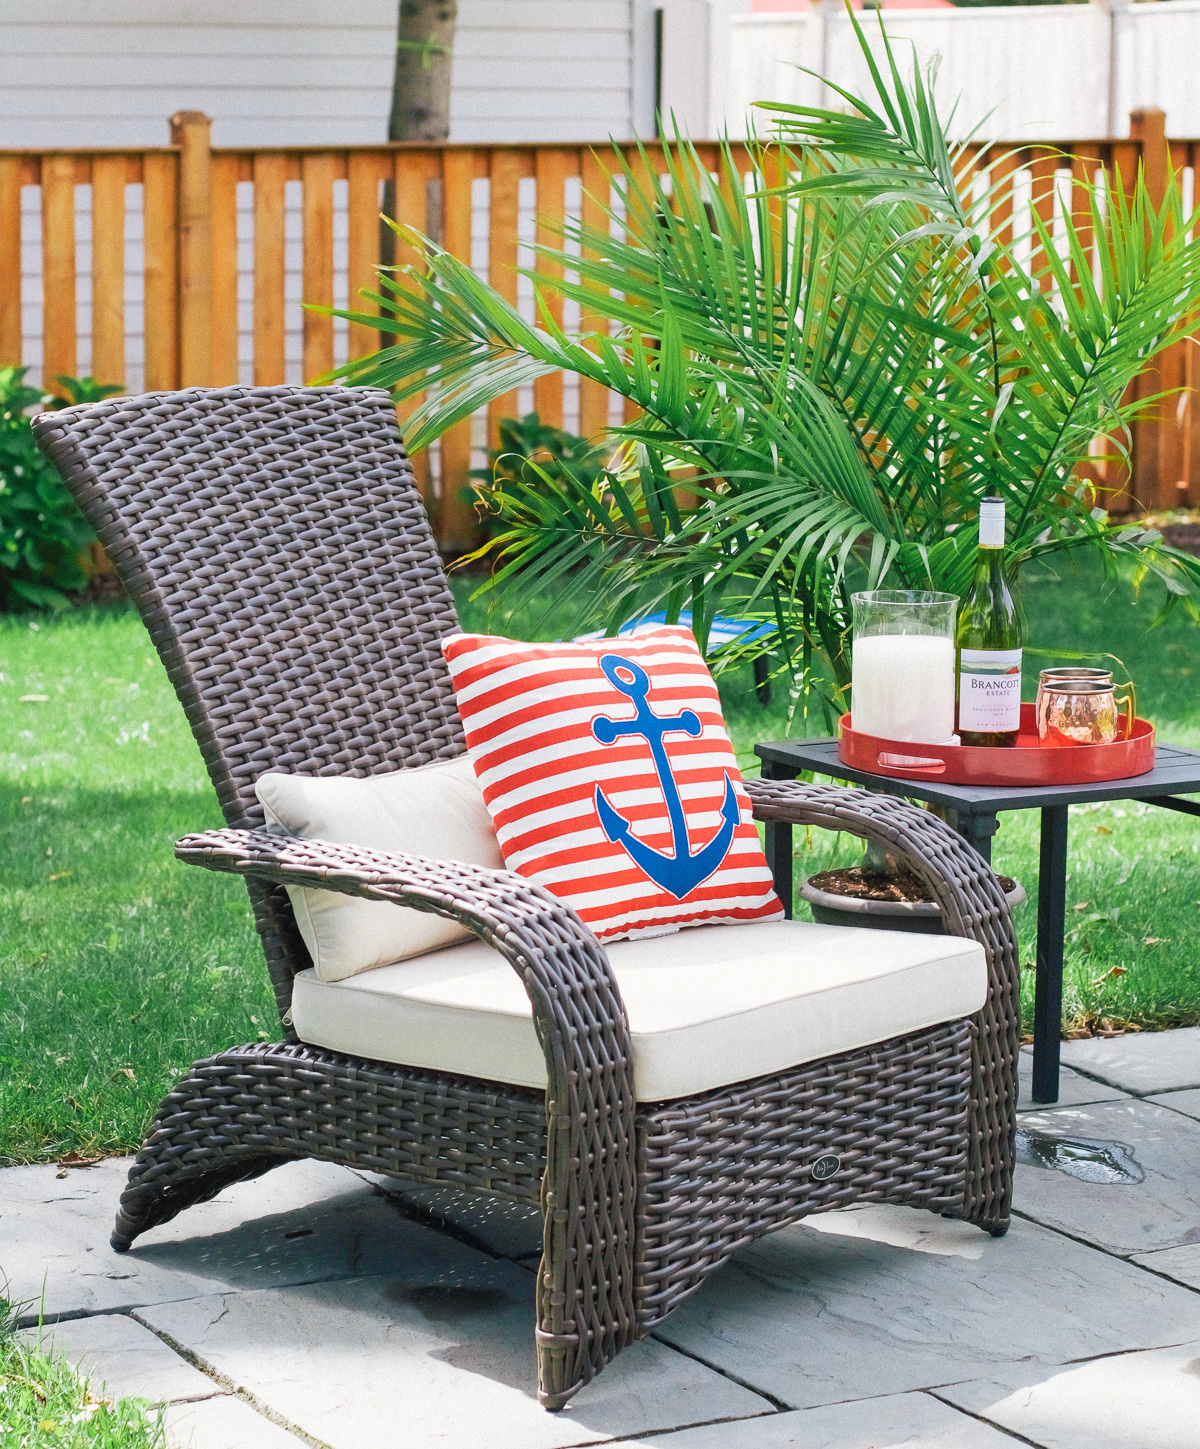 Shopping the Kmart patio furniture selection online was quick and included free shipping. Don’t miss the SummerBlowout Sale to save on clothing, home decor, outdoor furniture, outdoor games and more! www.SoChicLife.com 